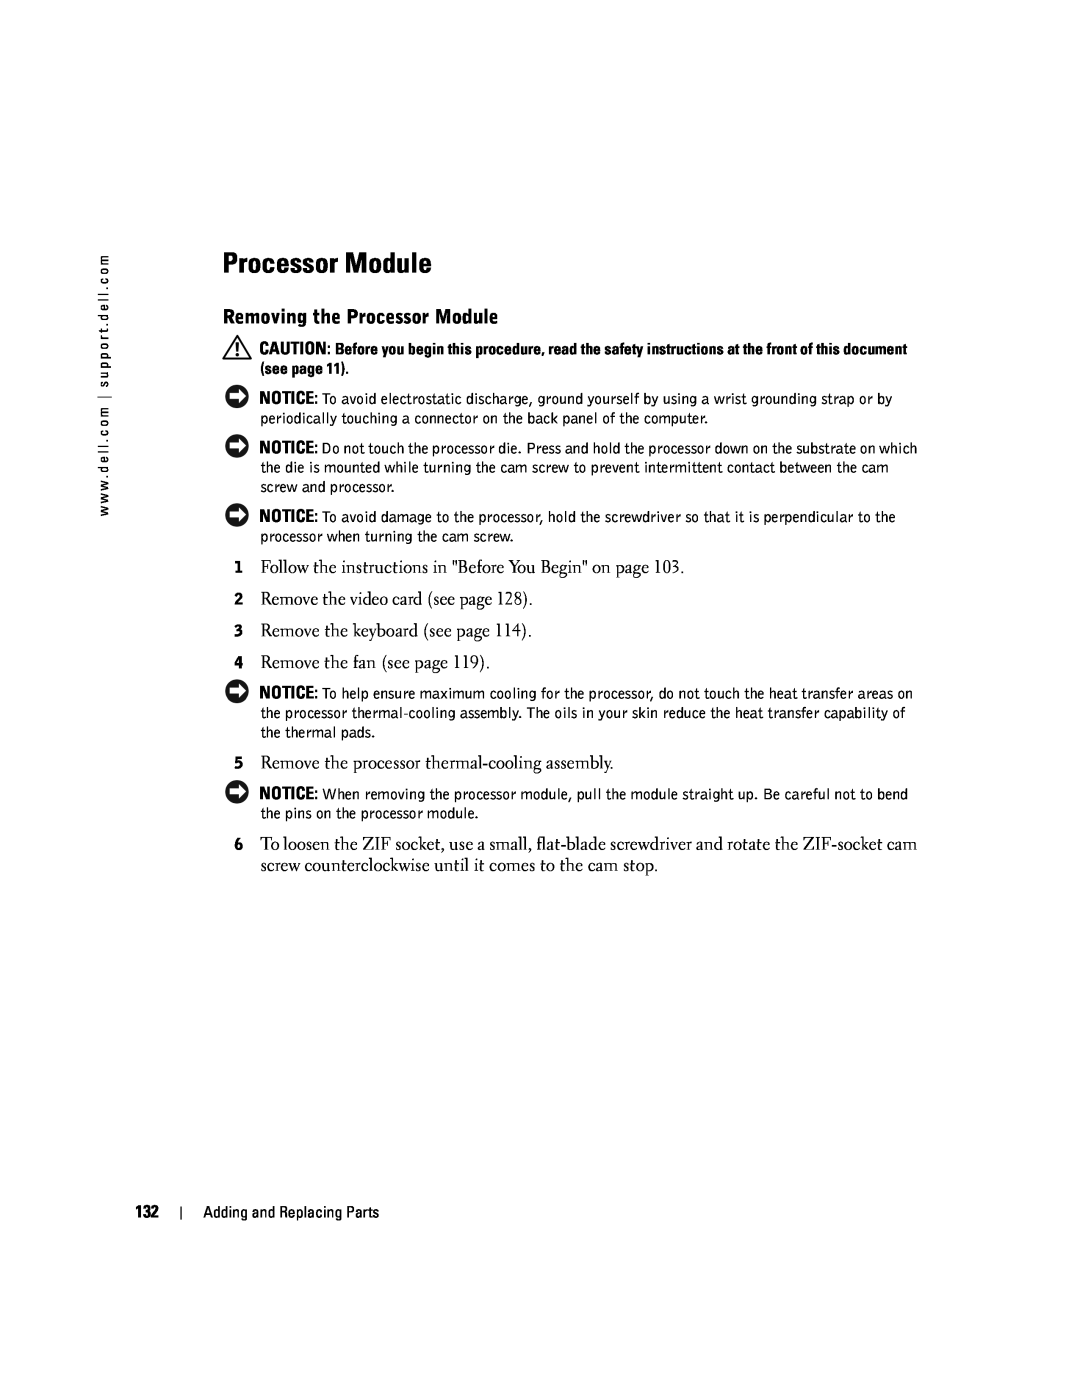 Dell PP09L owner manual Removing the Processor Module 